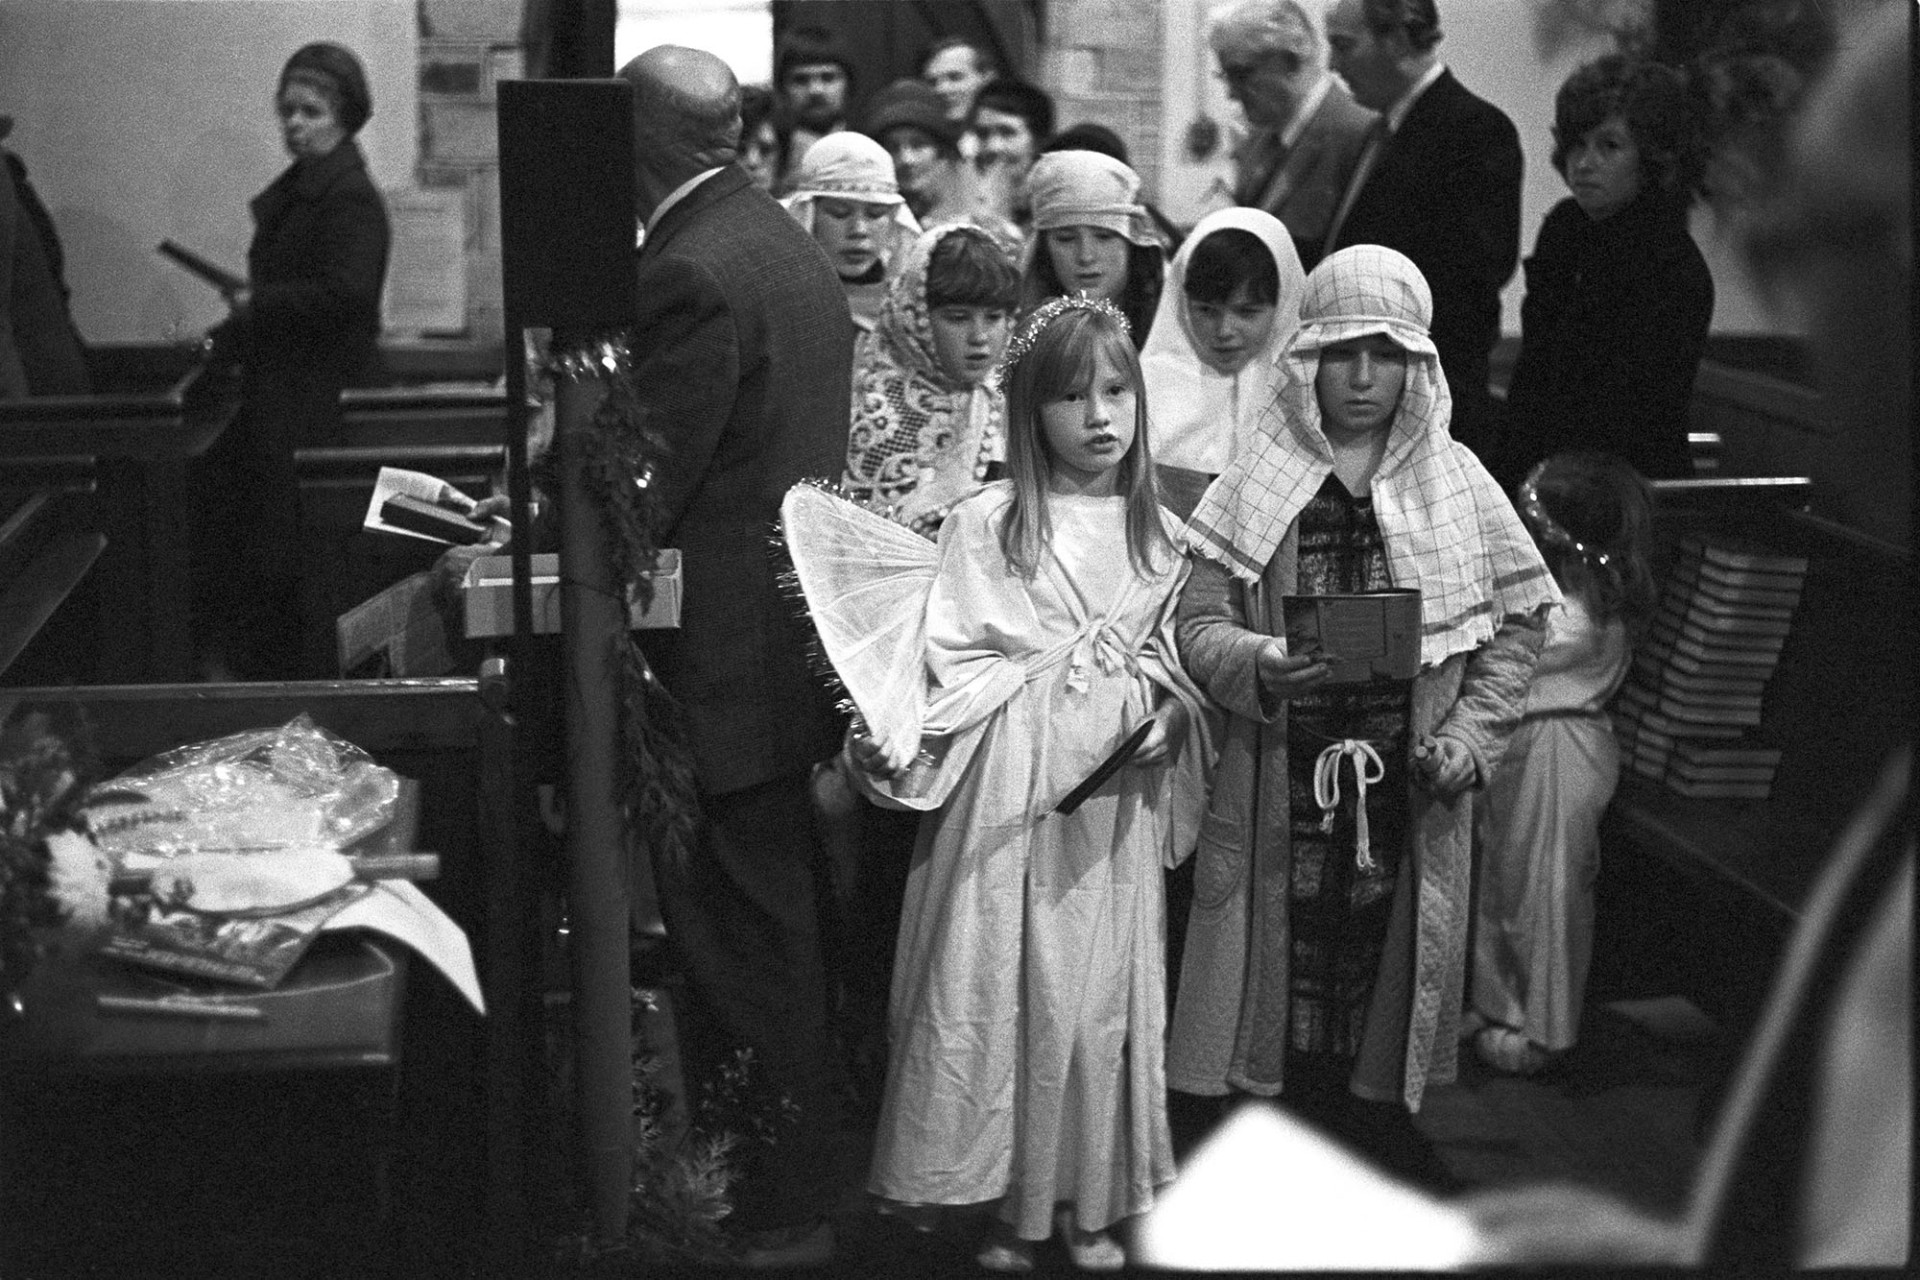 Nativity play, children in procession into church.
[Children processing into Dolton Church for a nativity play and service.  A girl is dressed as an angel and other children are dressed as shepherds. Members of the congregation are watching them.]